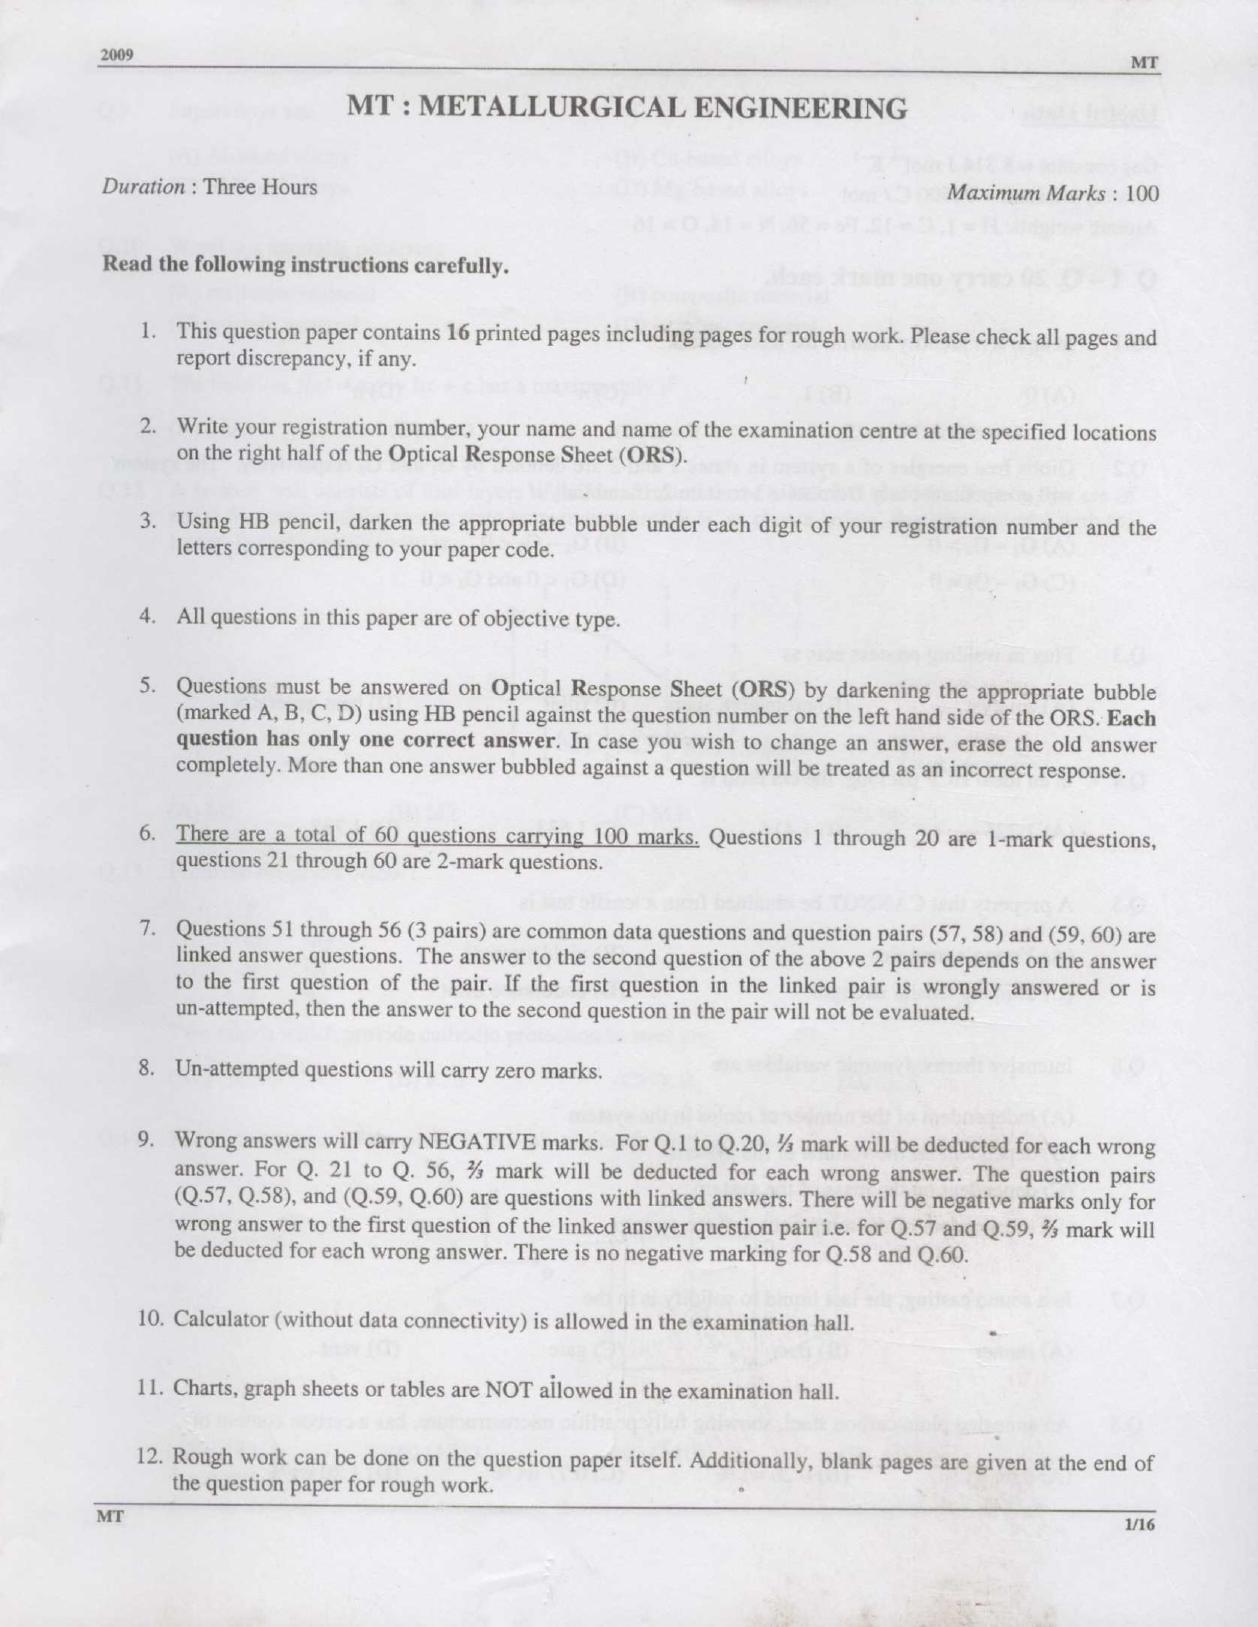 GATE 2009 Metallurgical Engineering (MT) Question Paper with Answer Key - Page 1